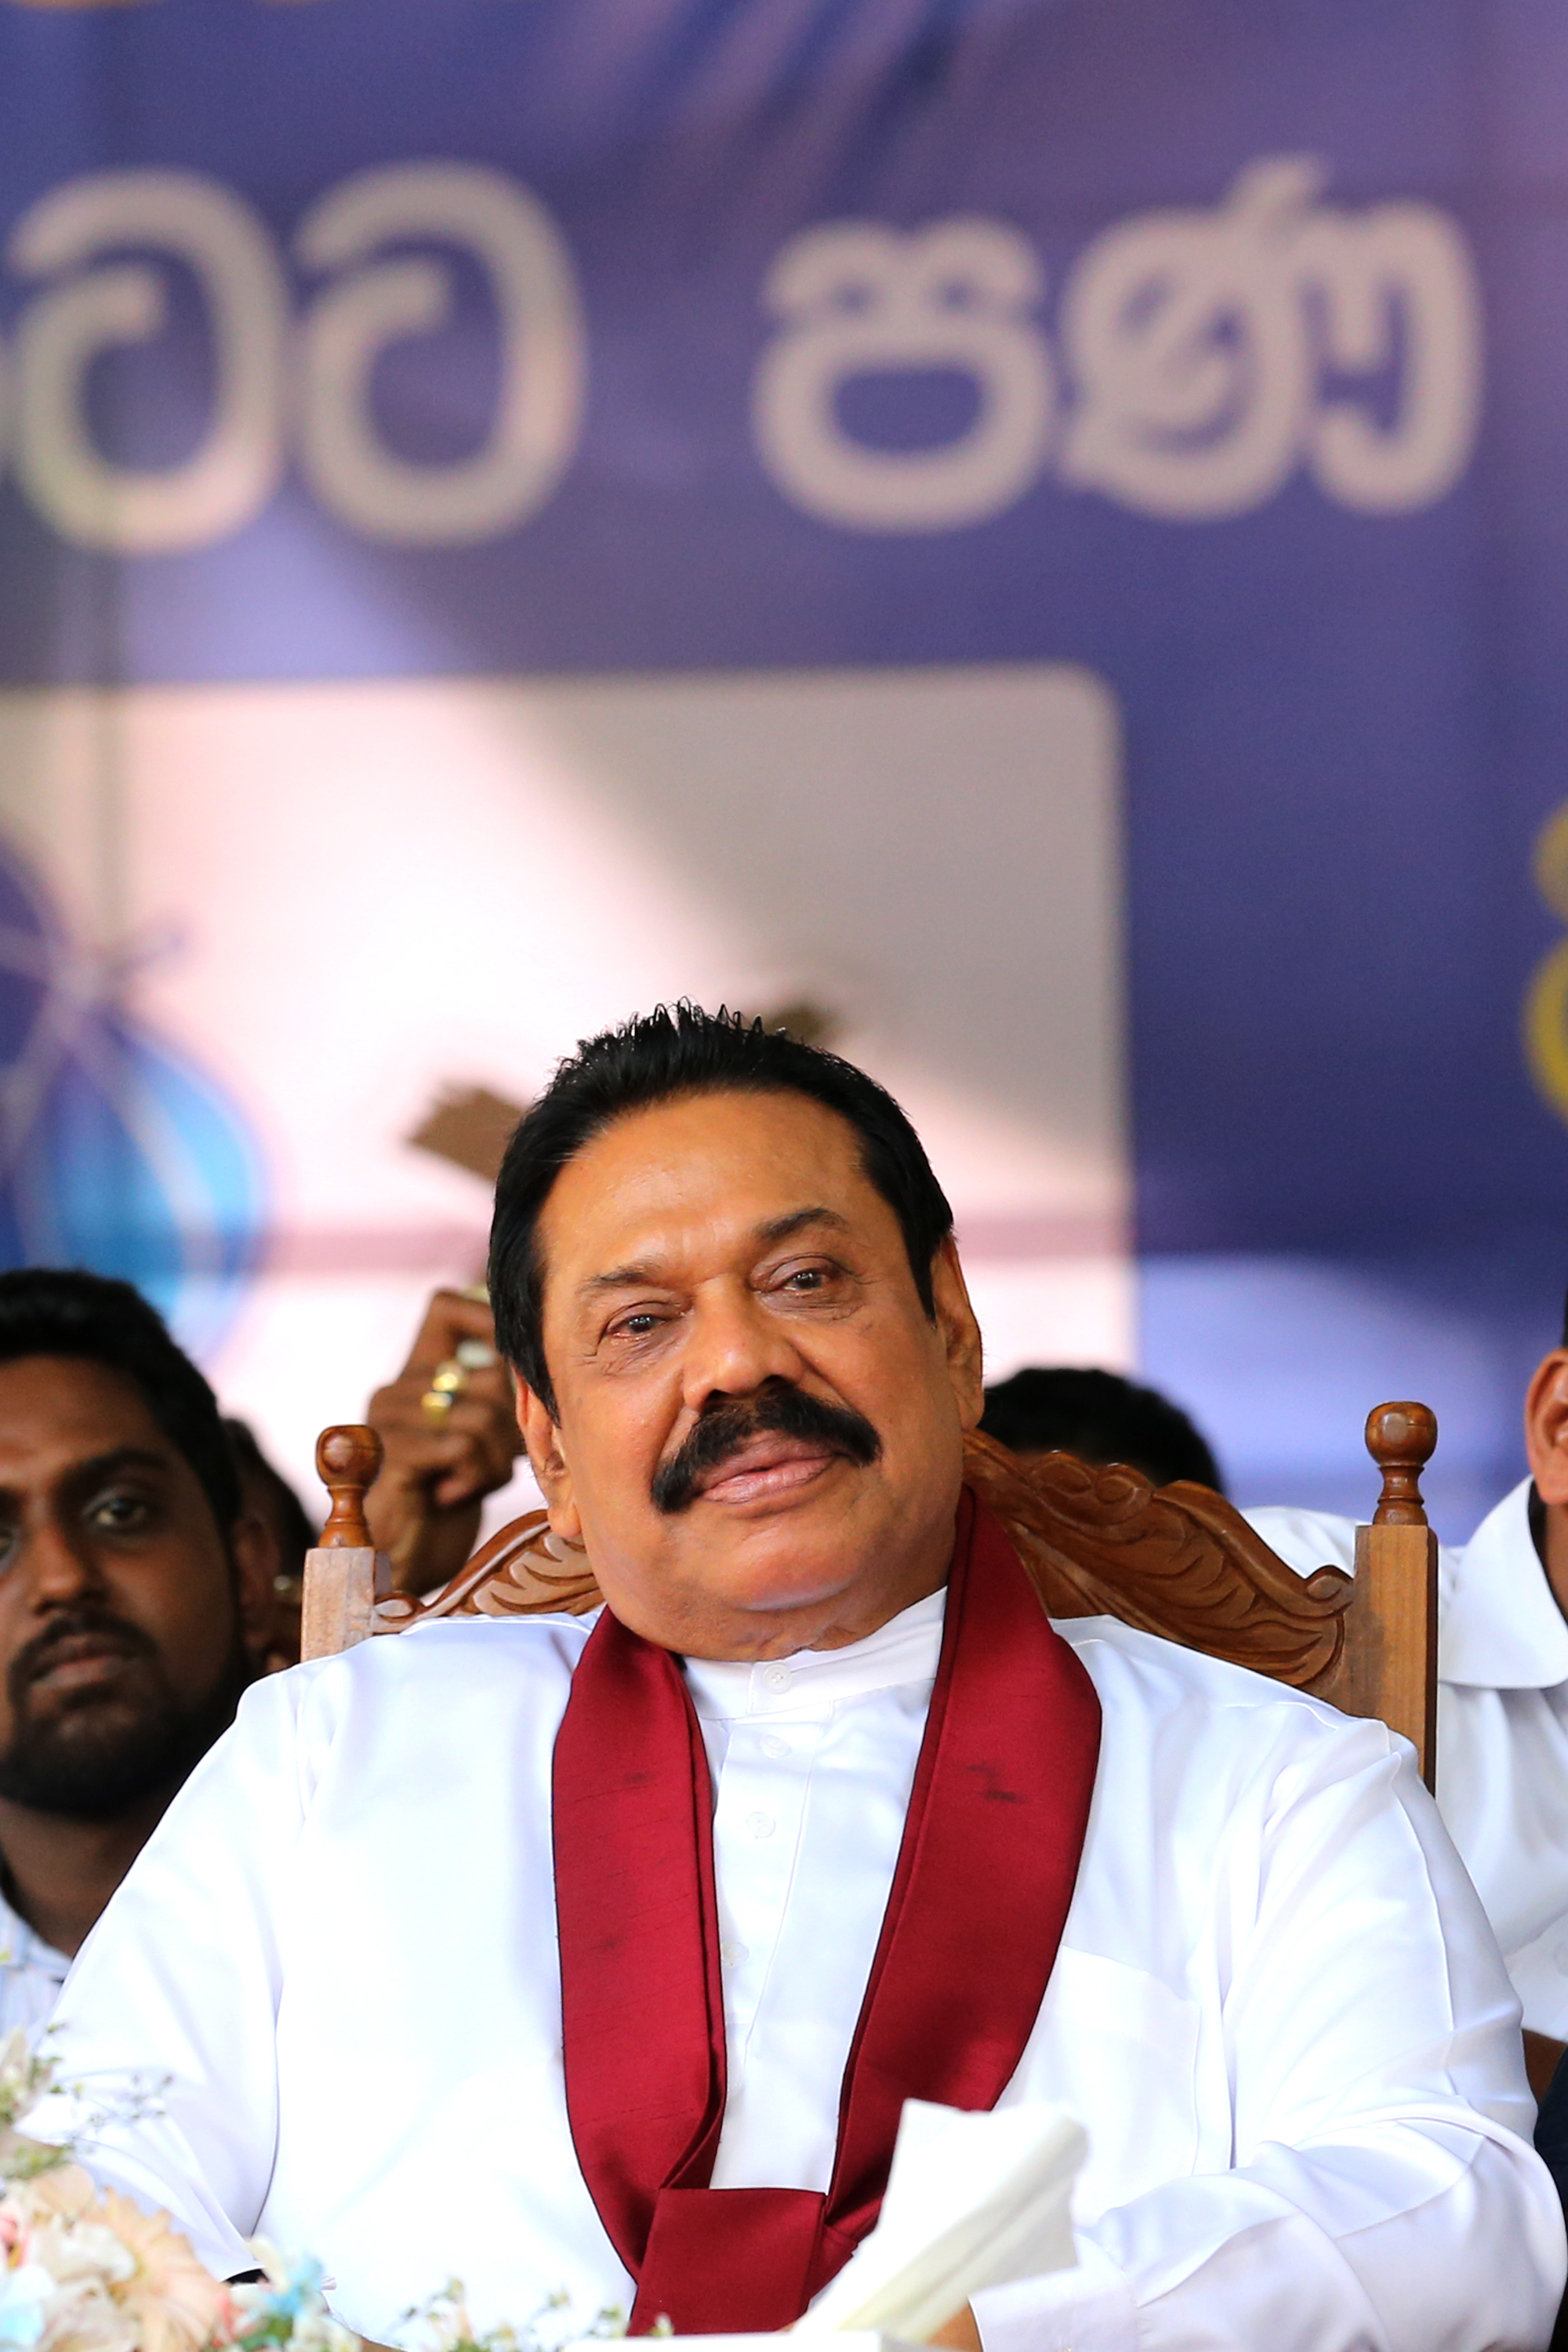 Final Day Of Campaigning In Sri Lanka Ahead Of General Election 2015